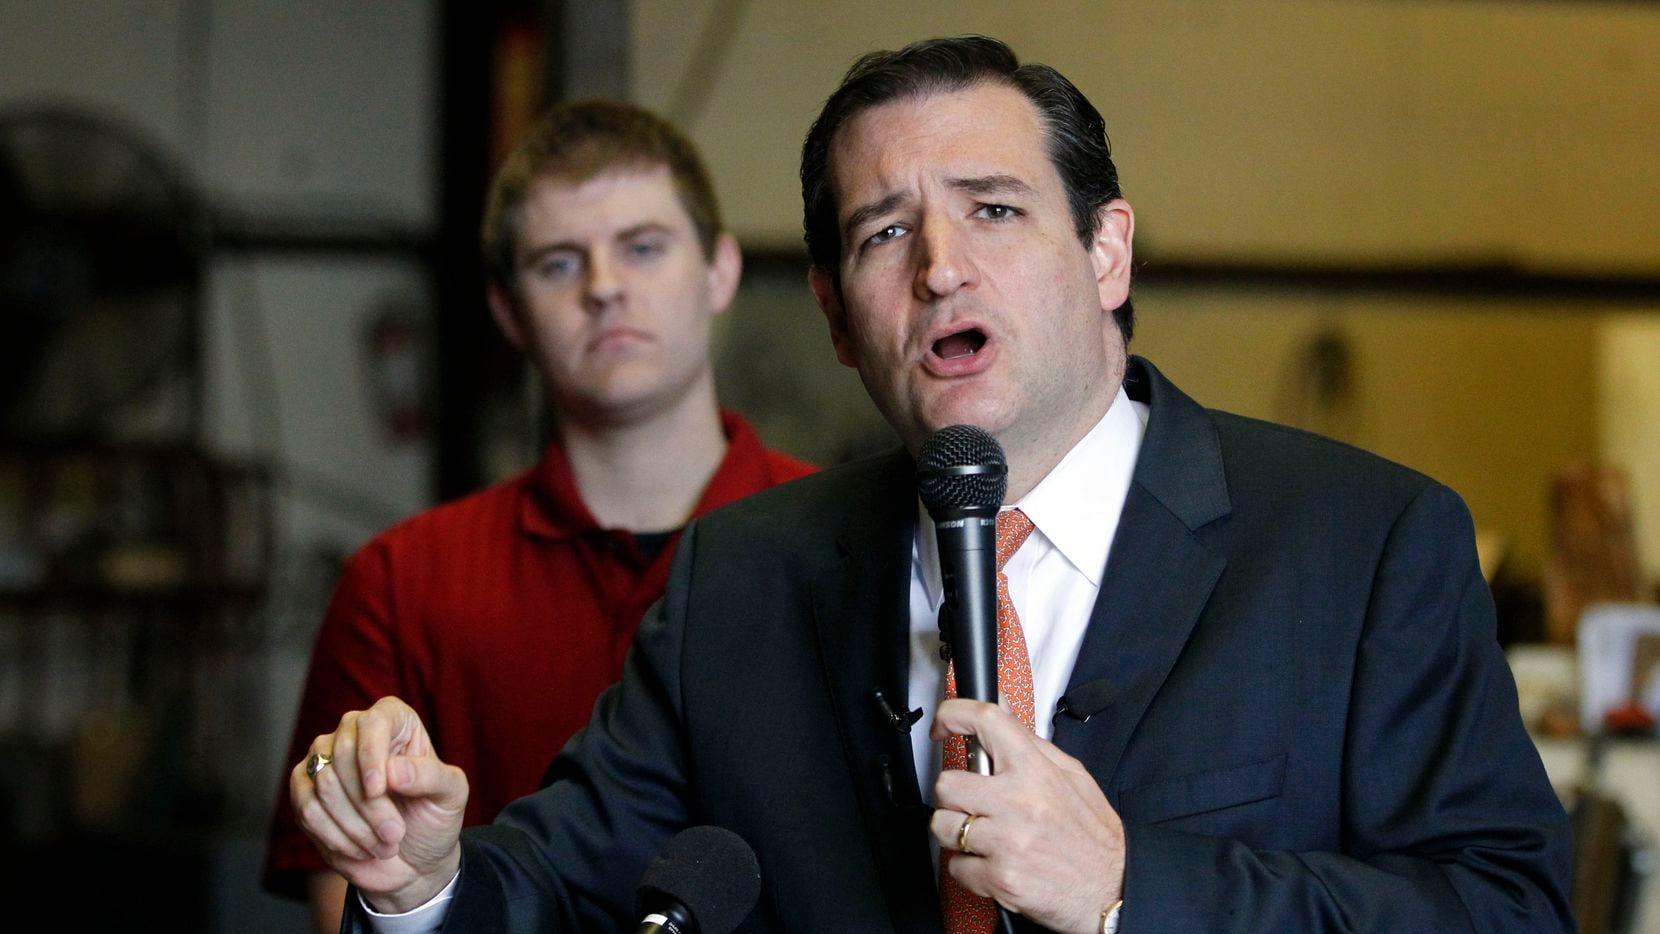 Sen. Ted Cruz talks during a press conference about the economy at Dallas Texas Tool and Die on February 19, 2013.